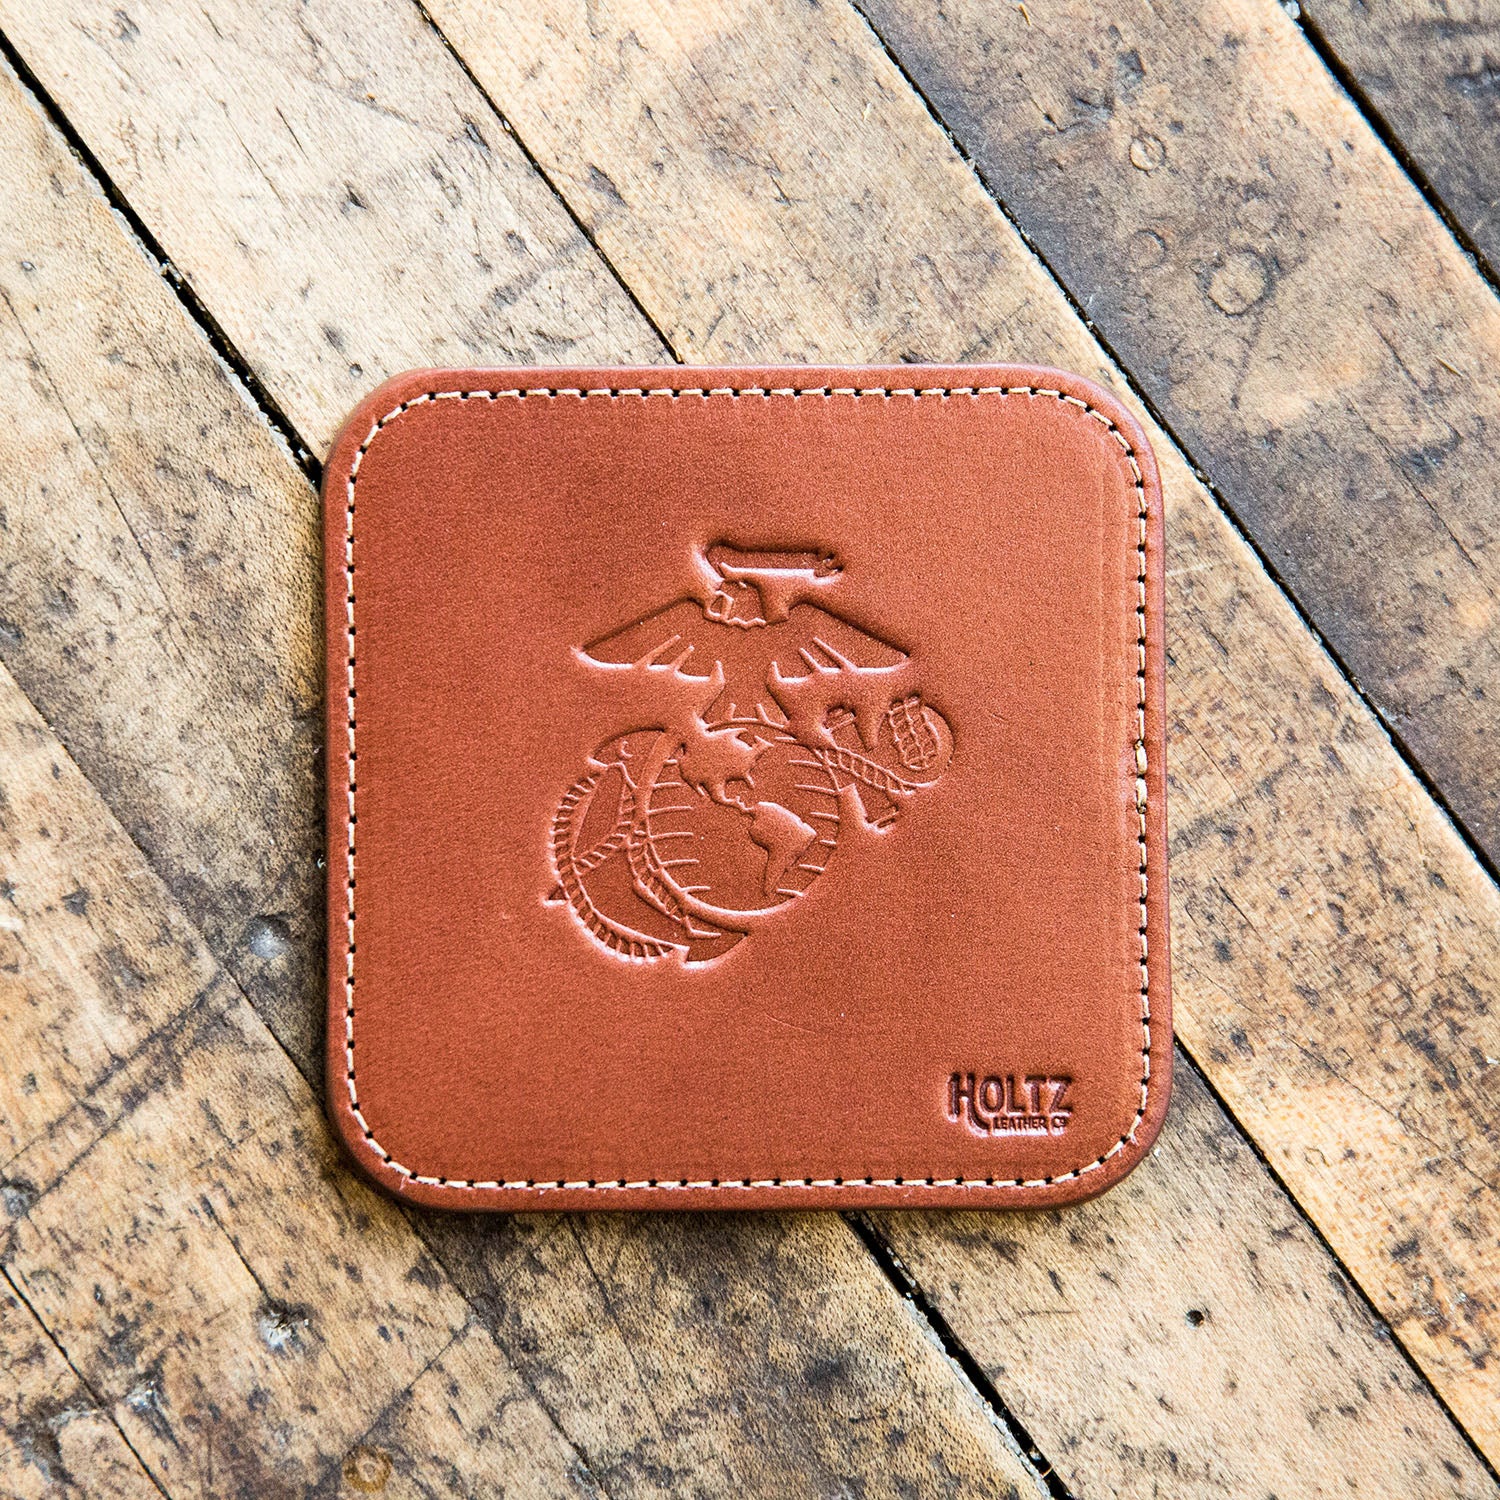 Fine leather coaster with Marine Corps logo and Holtz Leather Co logo